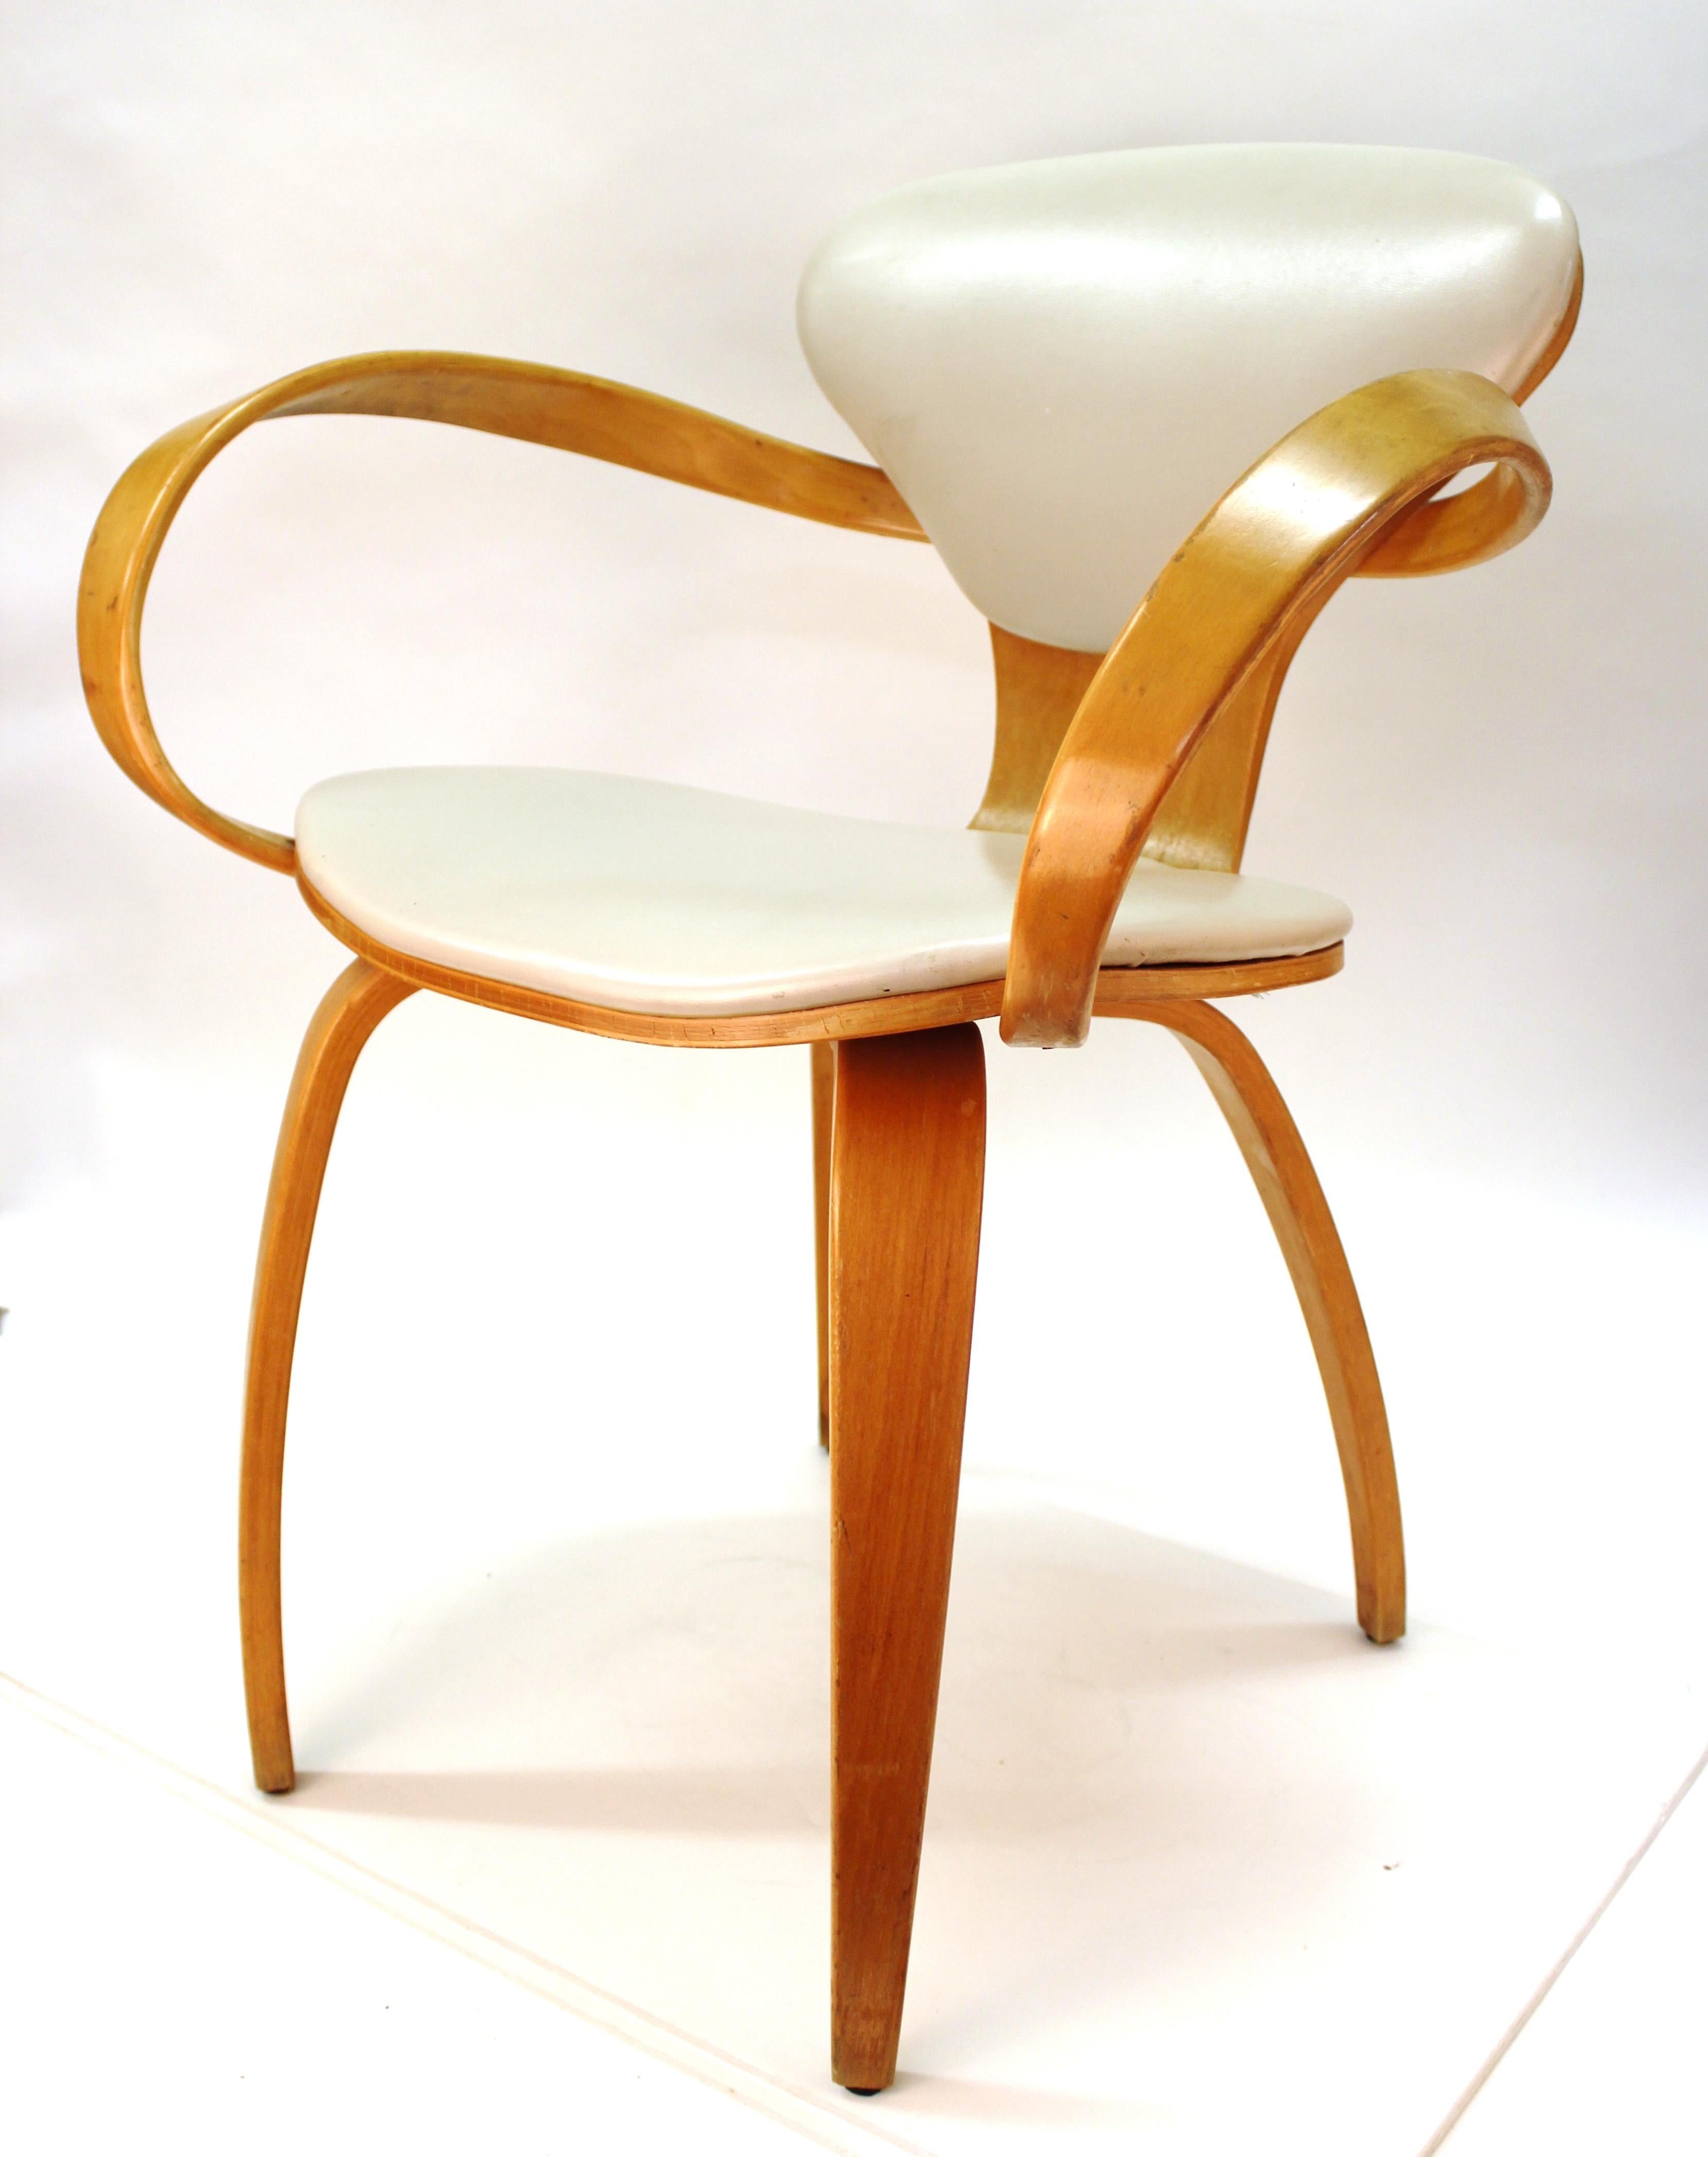 American Norman Cherner for Plycraft Mid-Century Modern Dining Room Chairs